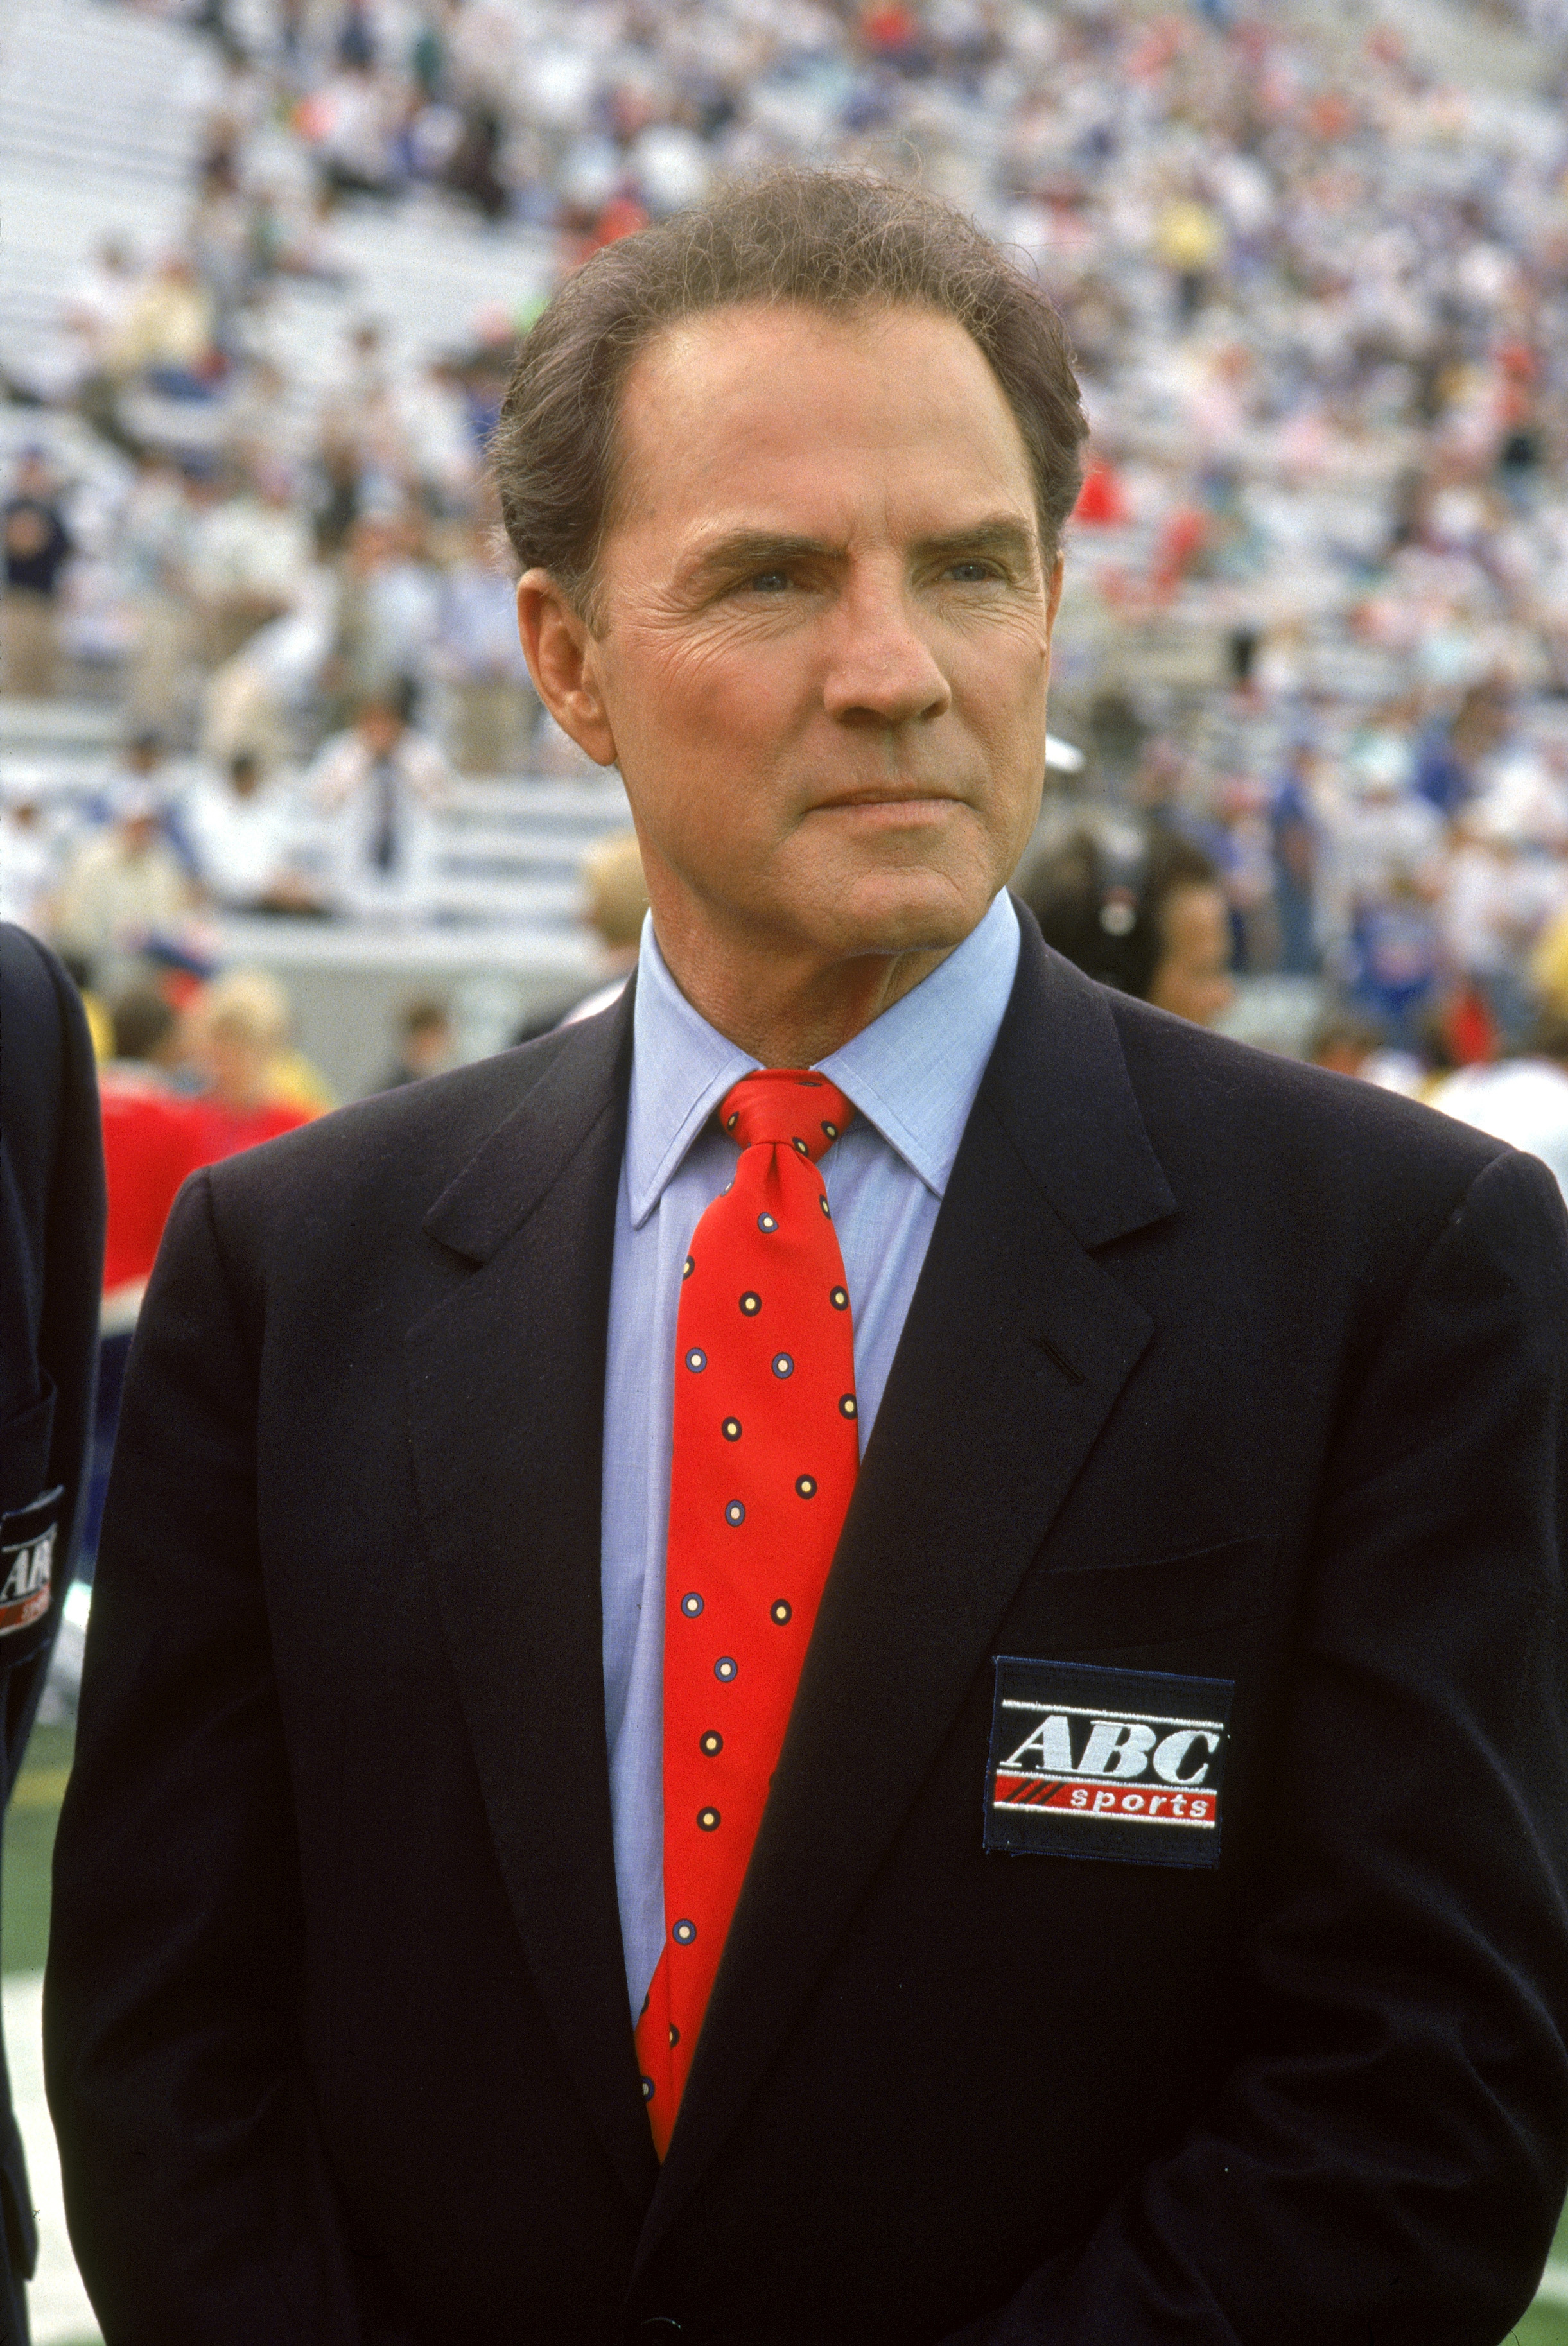 frank-gifford-obit-uncropped-getty-images-72068819.jpg 